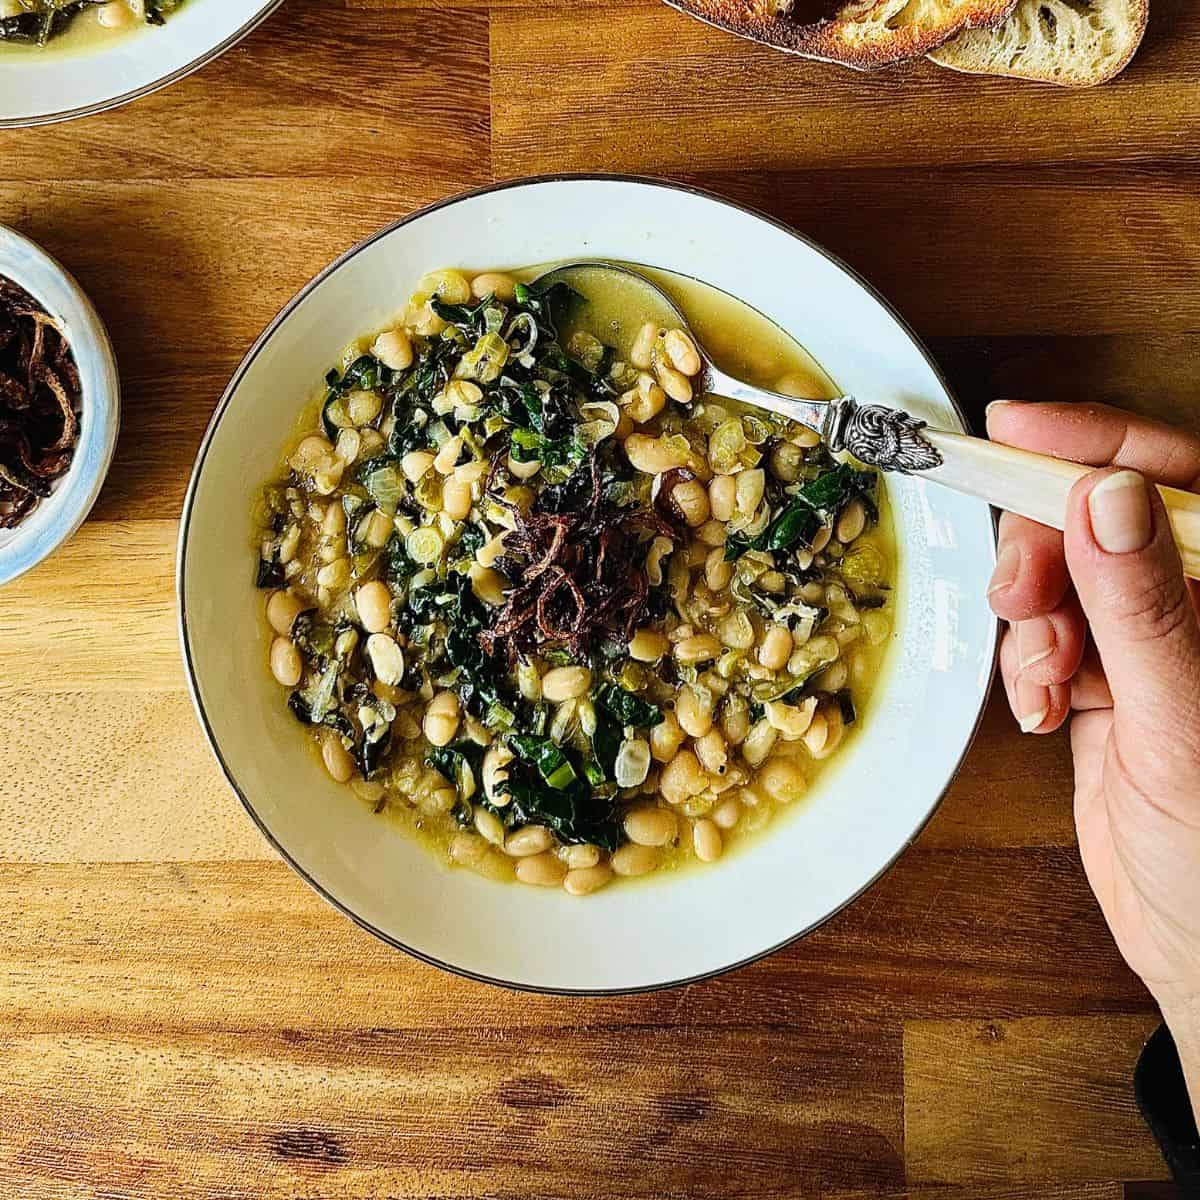 A serving bowl containing haricot bean stew with cavalo nero, and a fried onion garnish.